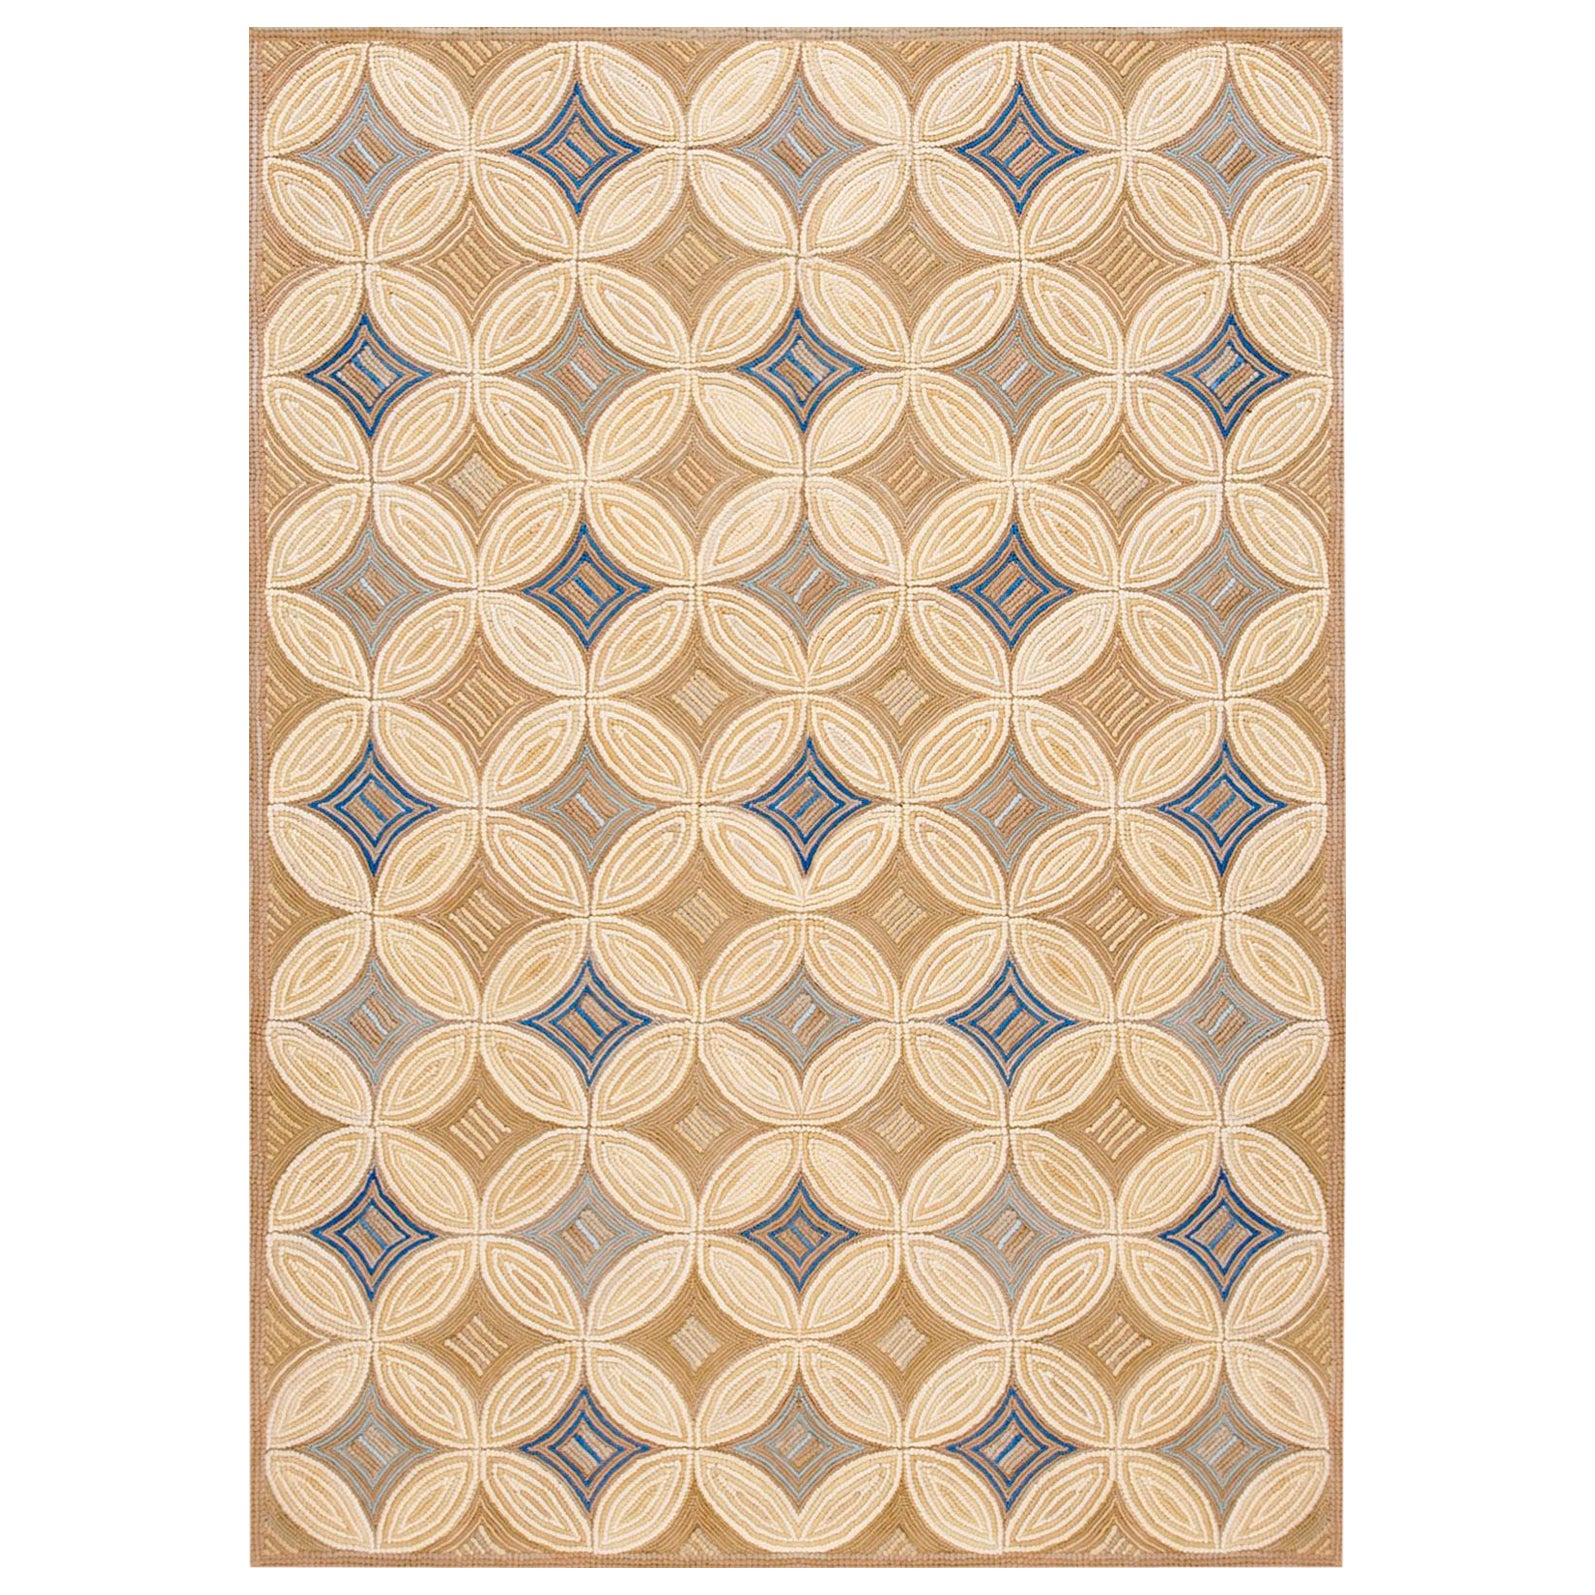 Contemporary Cotton Hooked Rug ( 6' x 9' - 183 x 275 )